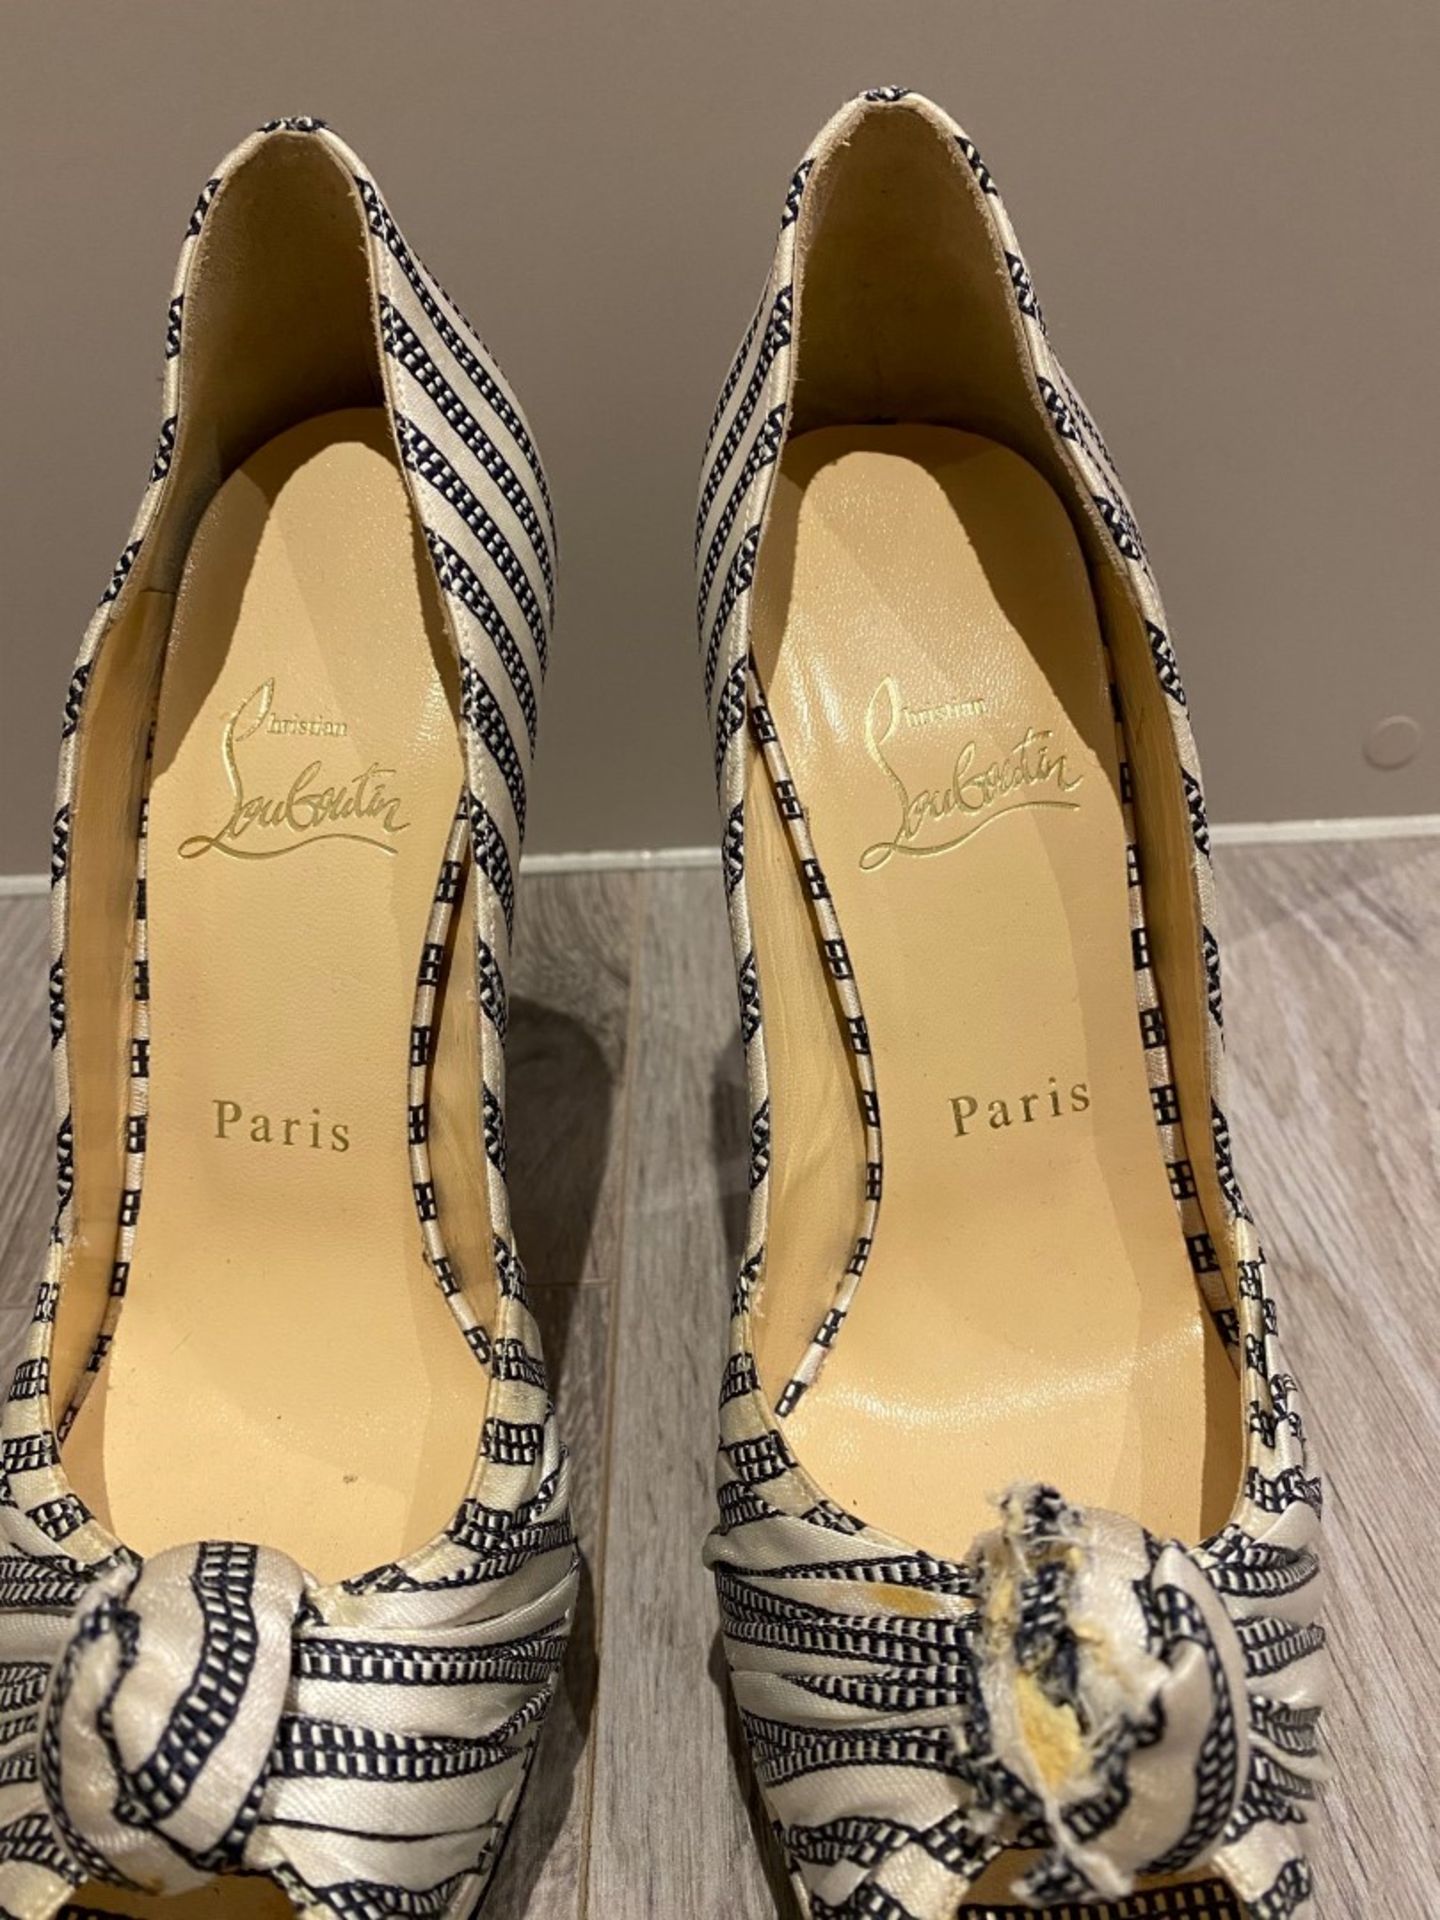 1 x Pair Of Genuine Christain Louboutin High Heel Shoes In Stripe - Size: 37 - Preowned in Very Worn - Image 2 of 5